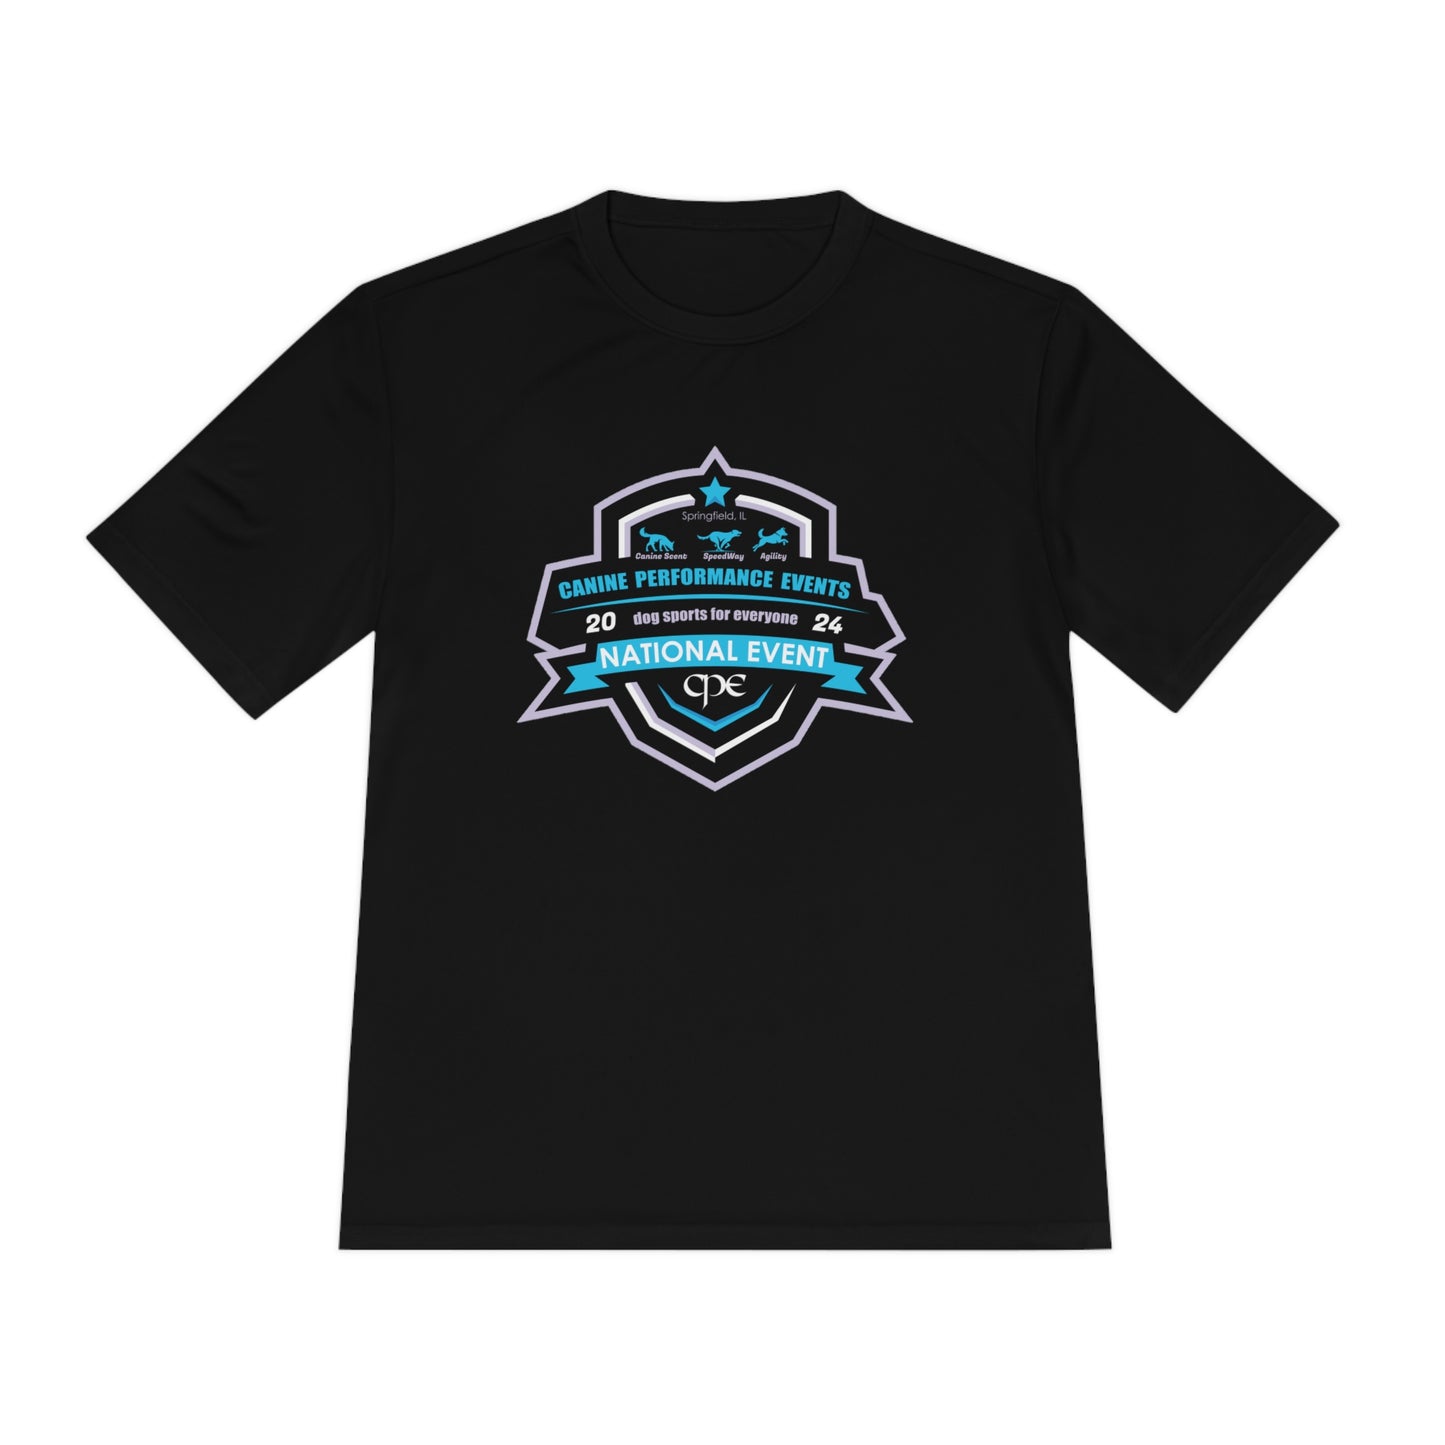 Team Lacey Blue - CPE Nationals Unisex Moisture Wicking Tee